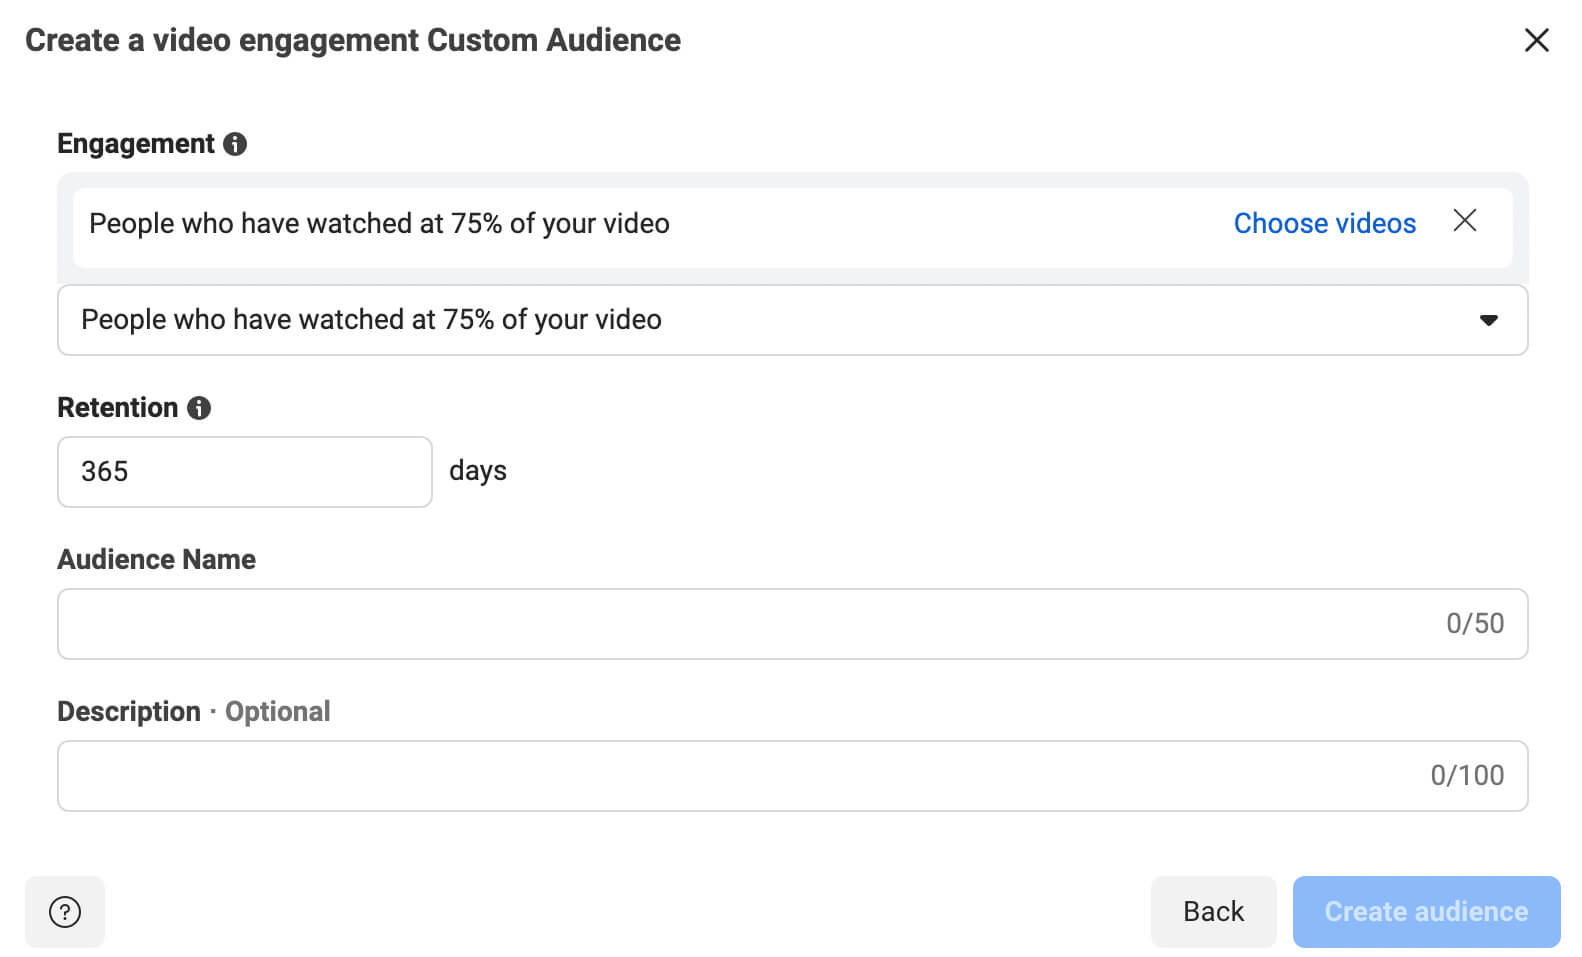 how-to-set-up-meta-call-ads-for-the-facebook-customer-journey-video-creatives-remarket-based-on-viewers-of-specific-videos-create-a-video-engagement-cutsom-audience-example-5